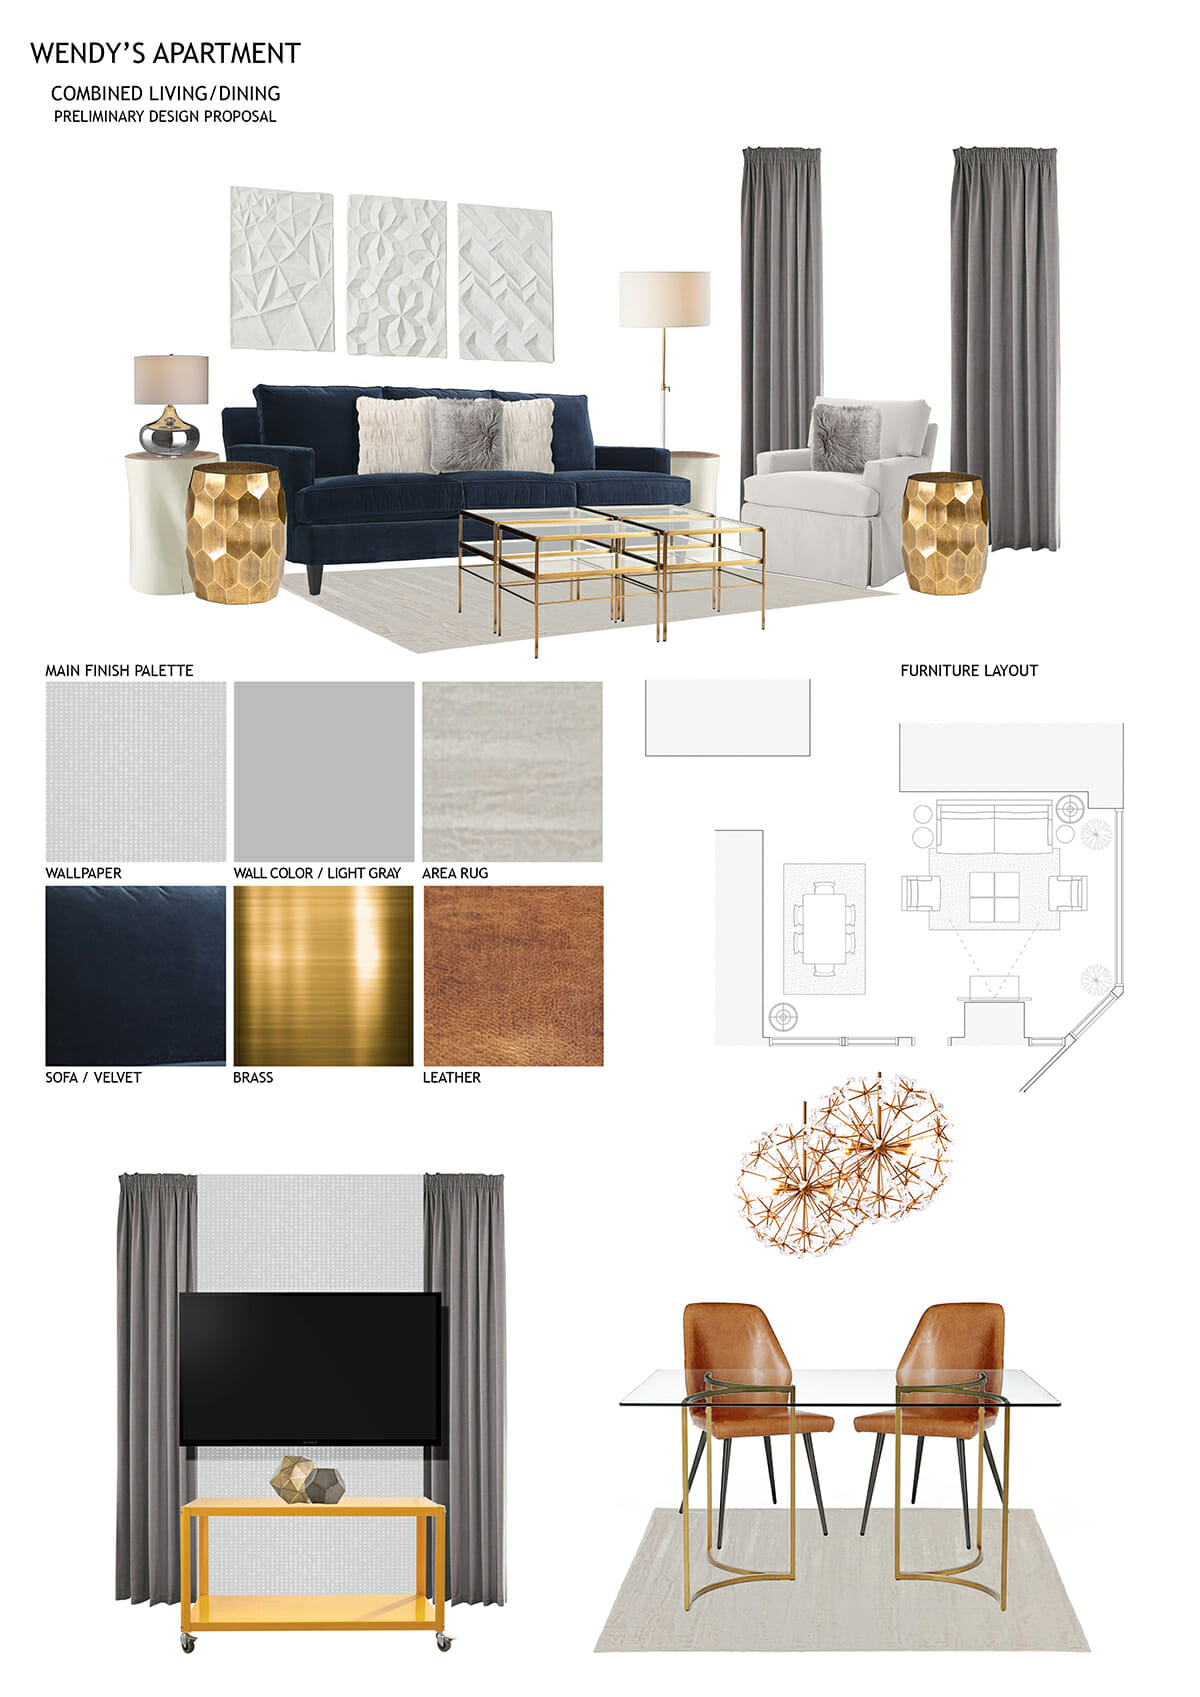 modern-apartment-design-with-metallic-finishes-initial-mood-board-1